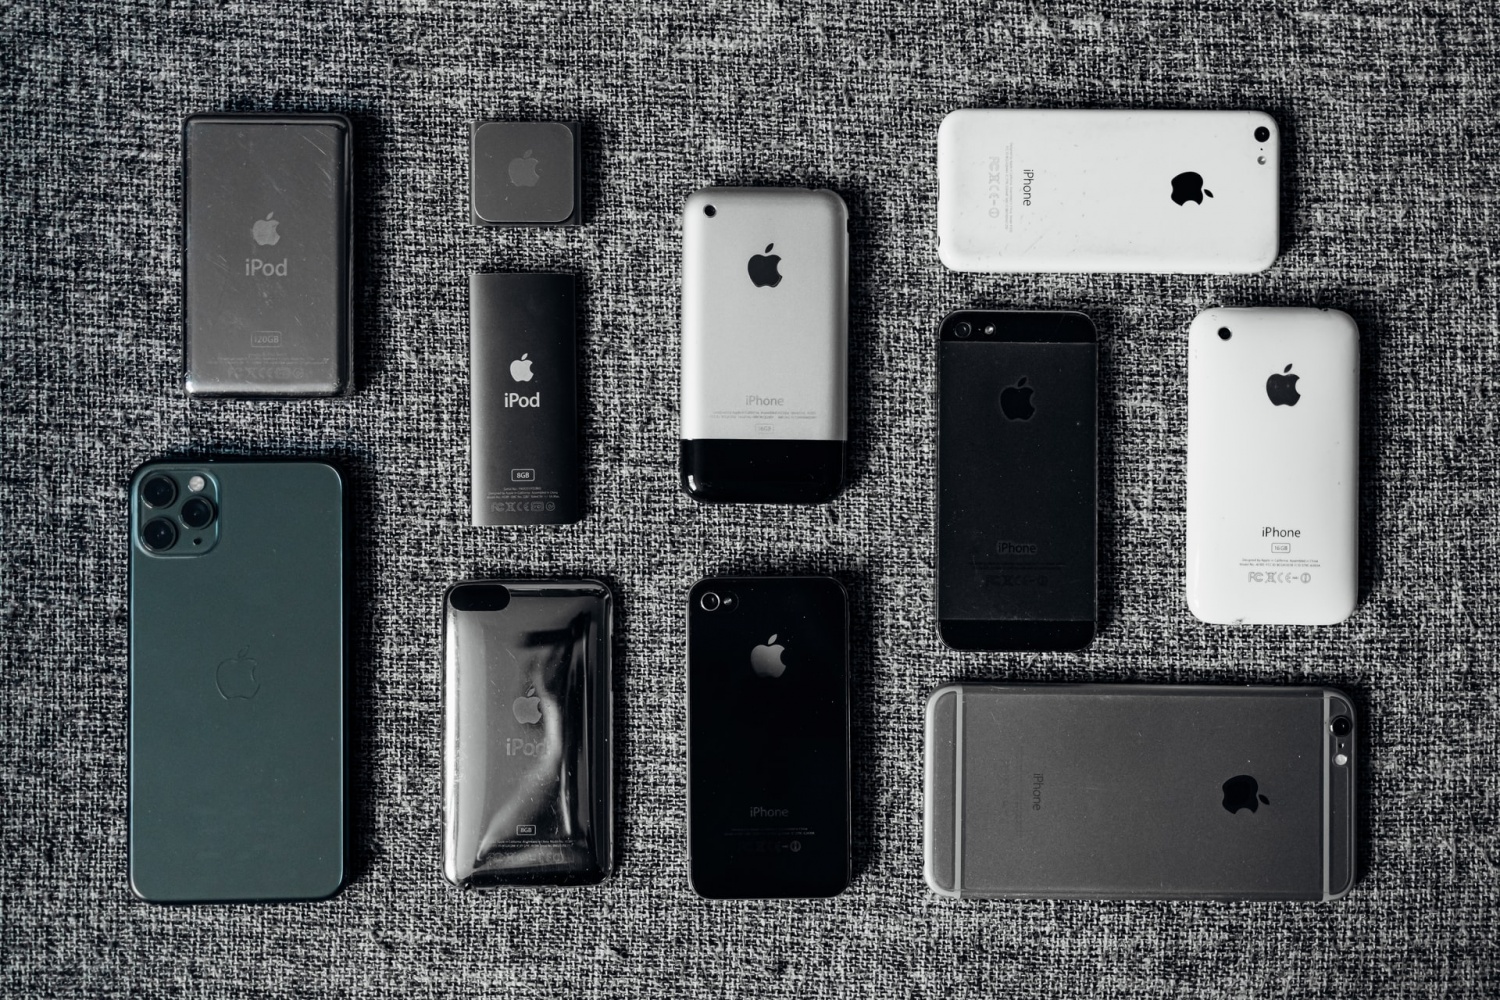 Apple Asks Suppliers to Assemble ‘Roughly’ 220 Million iPhones in 2022